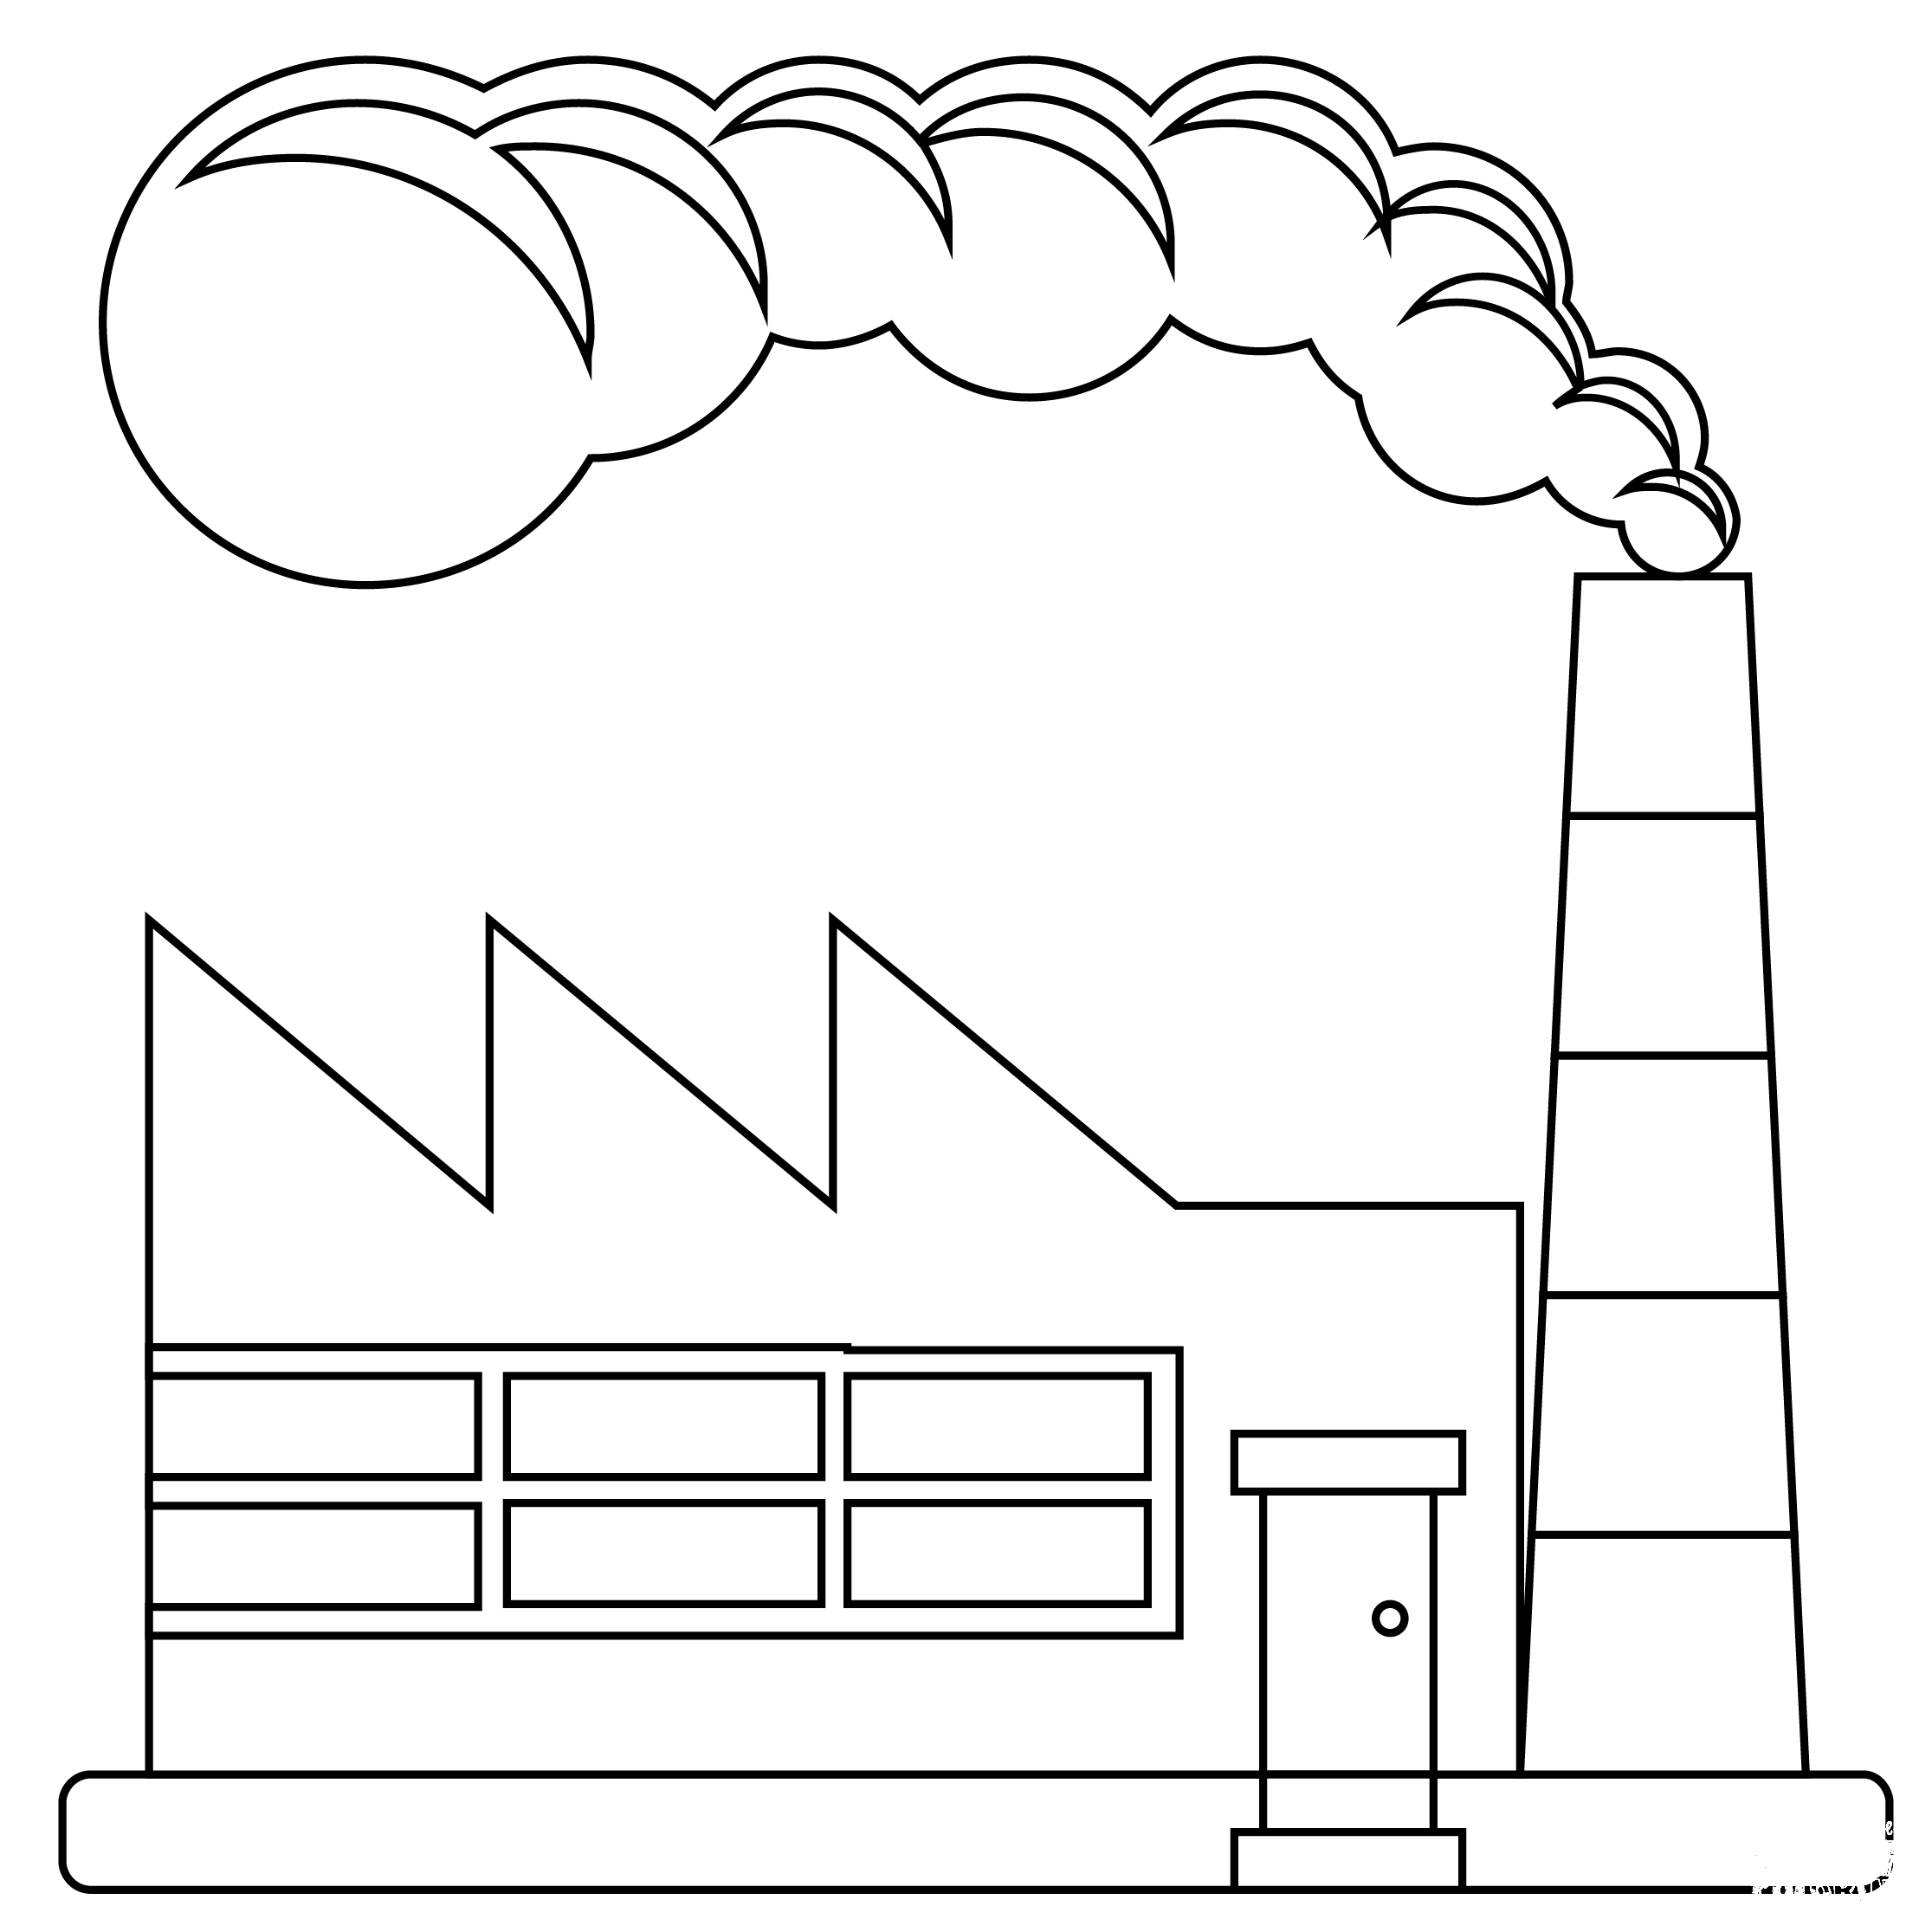 Factory coloring page - ColouringPages